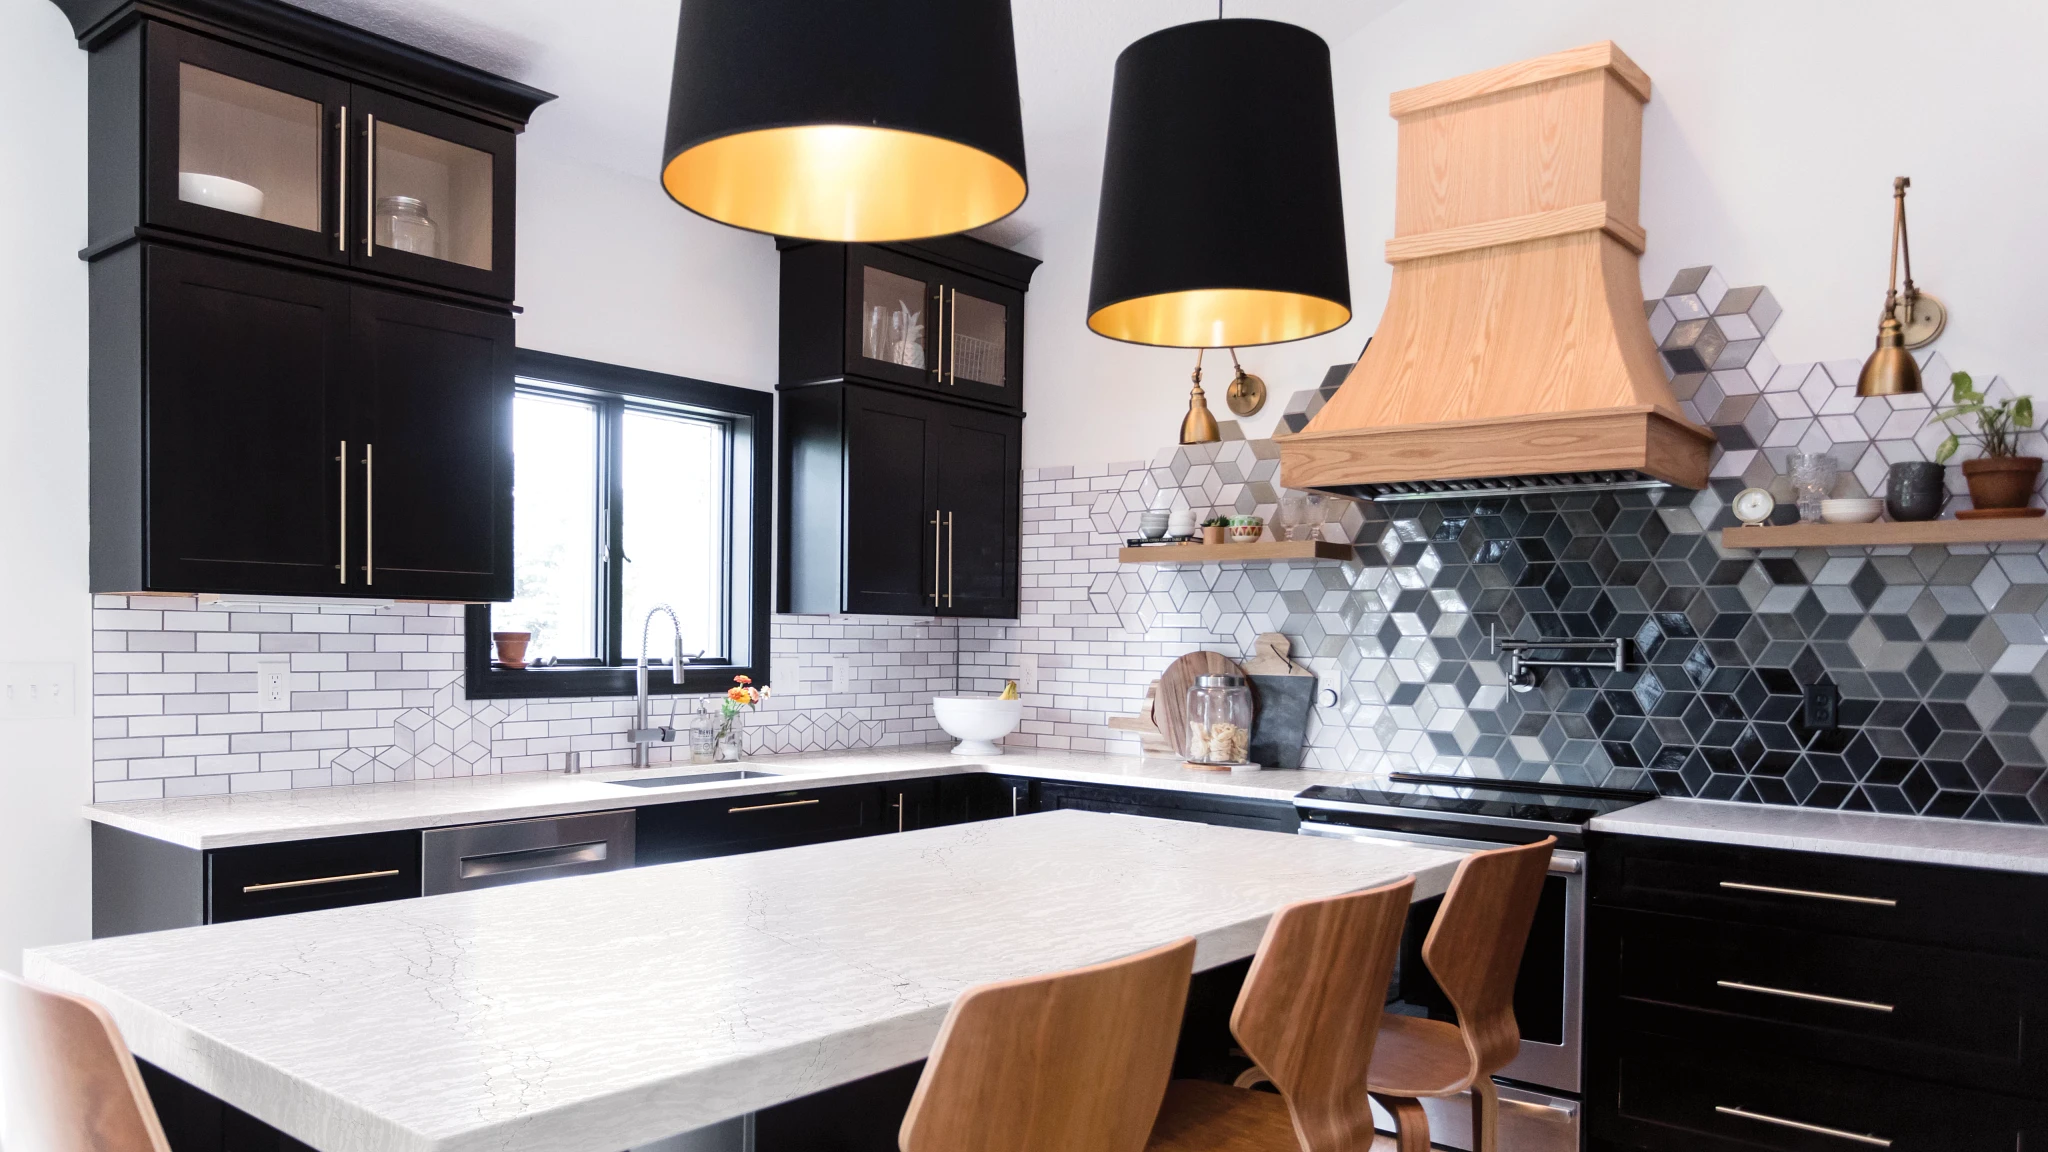 a bold kitchen with black and white cubical tiled backsplash as well as white subway tile, with black upper and lower cabinets, white quartz countertops, a small island, wooden hood over the range, and wooden bar stools